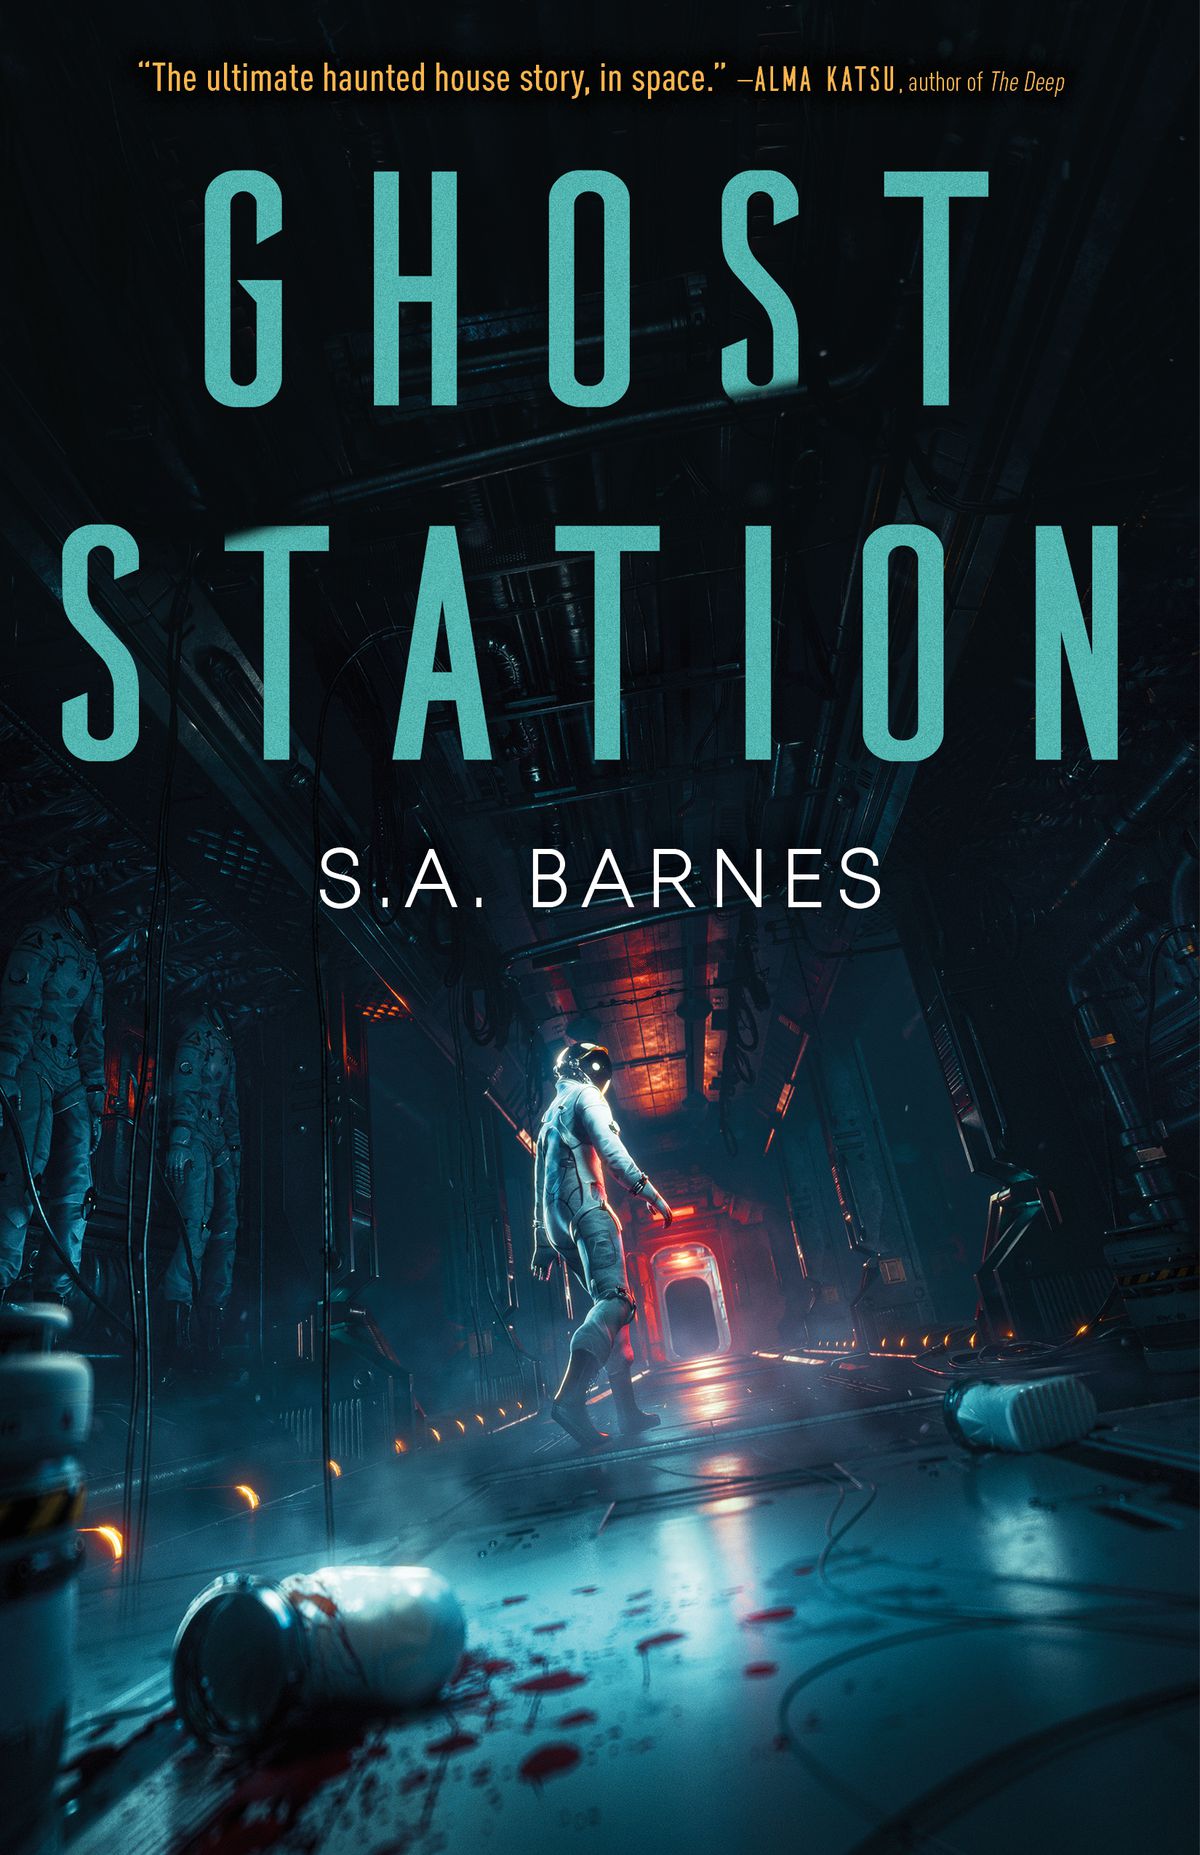 An astronaut walks in a dark space station with blood on the floor in the cover for S.A. Barnes’ Ghost Station.